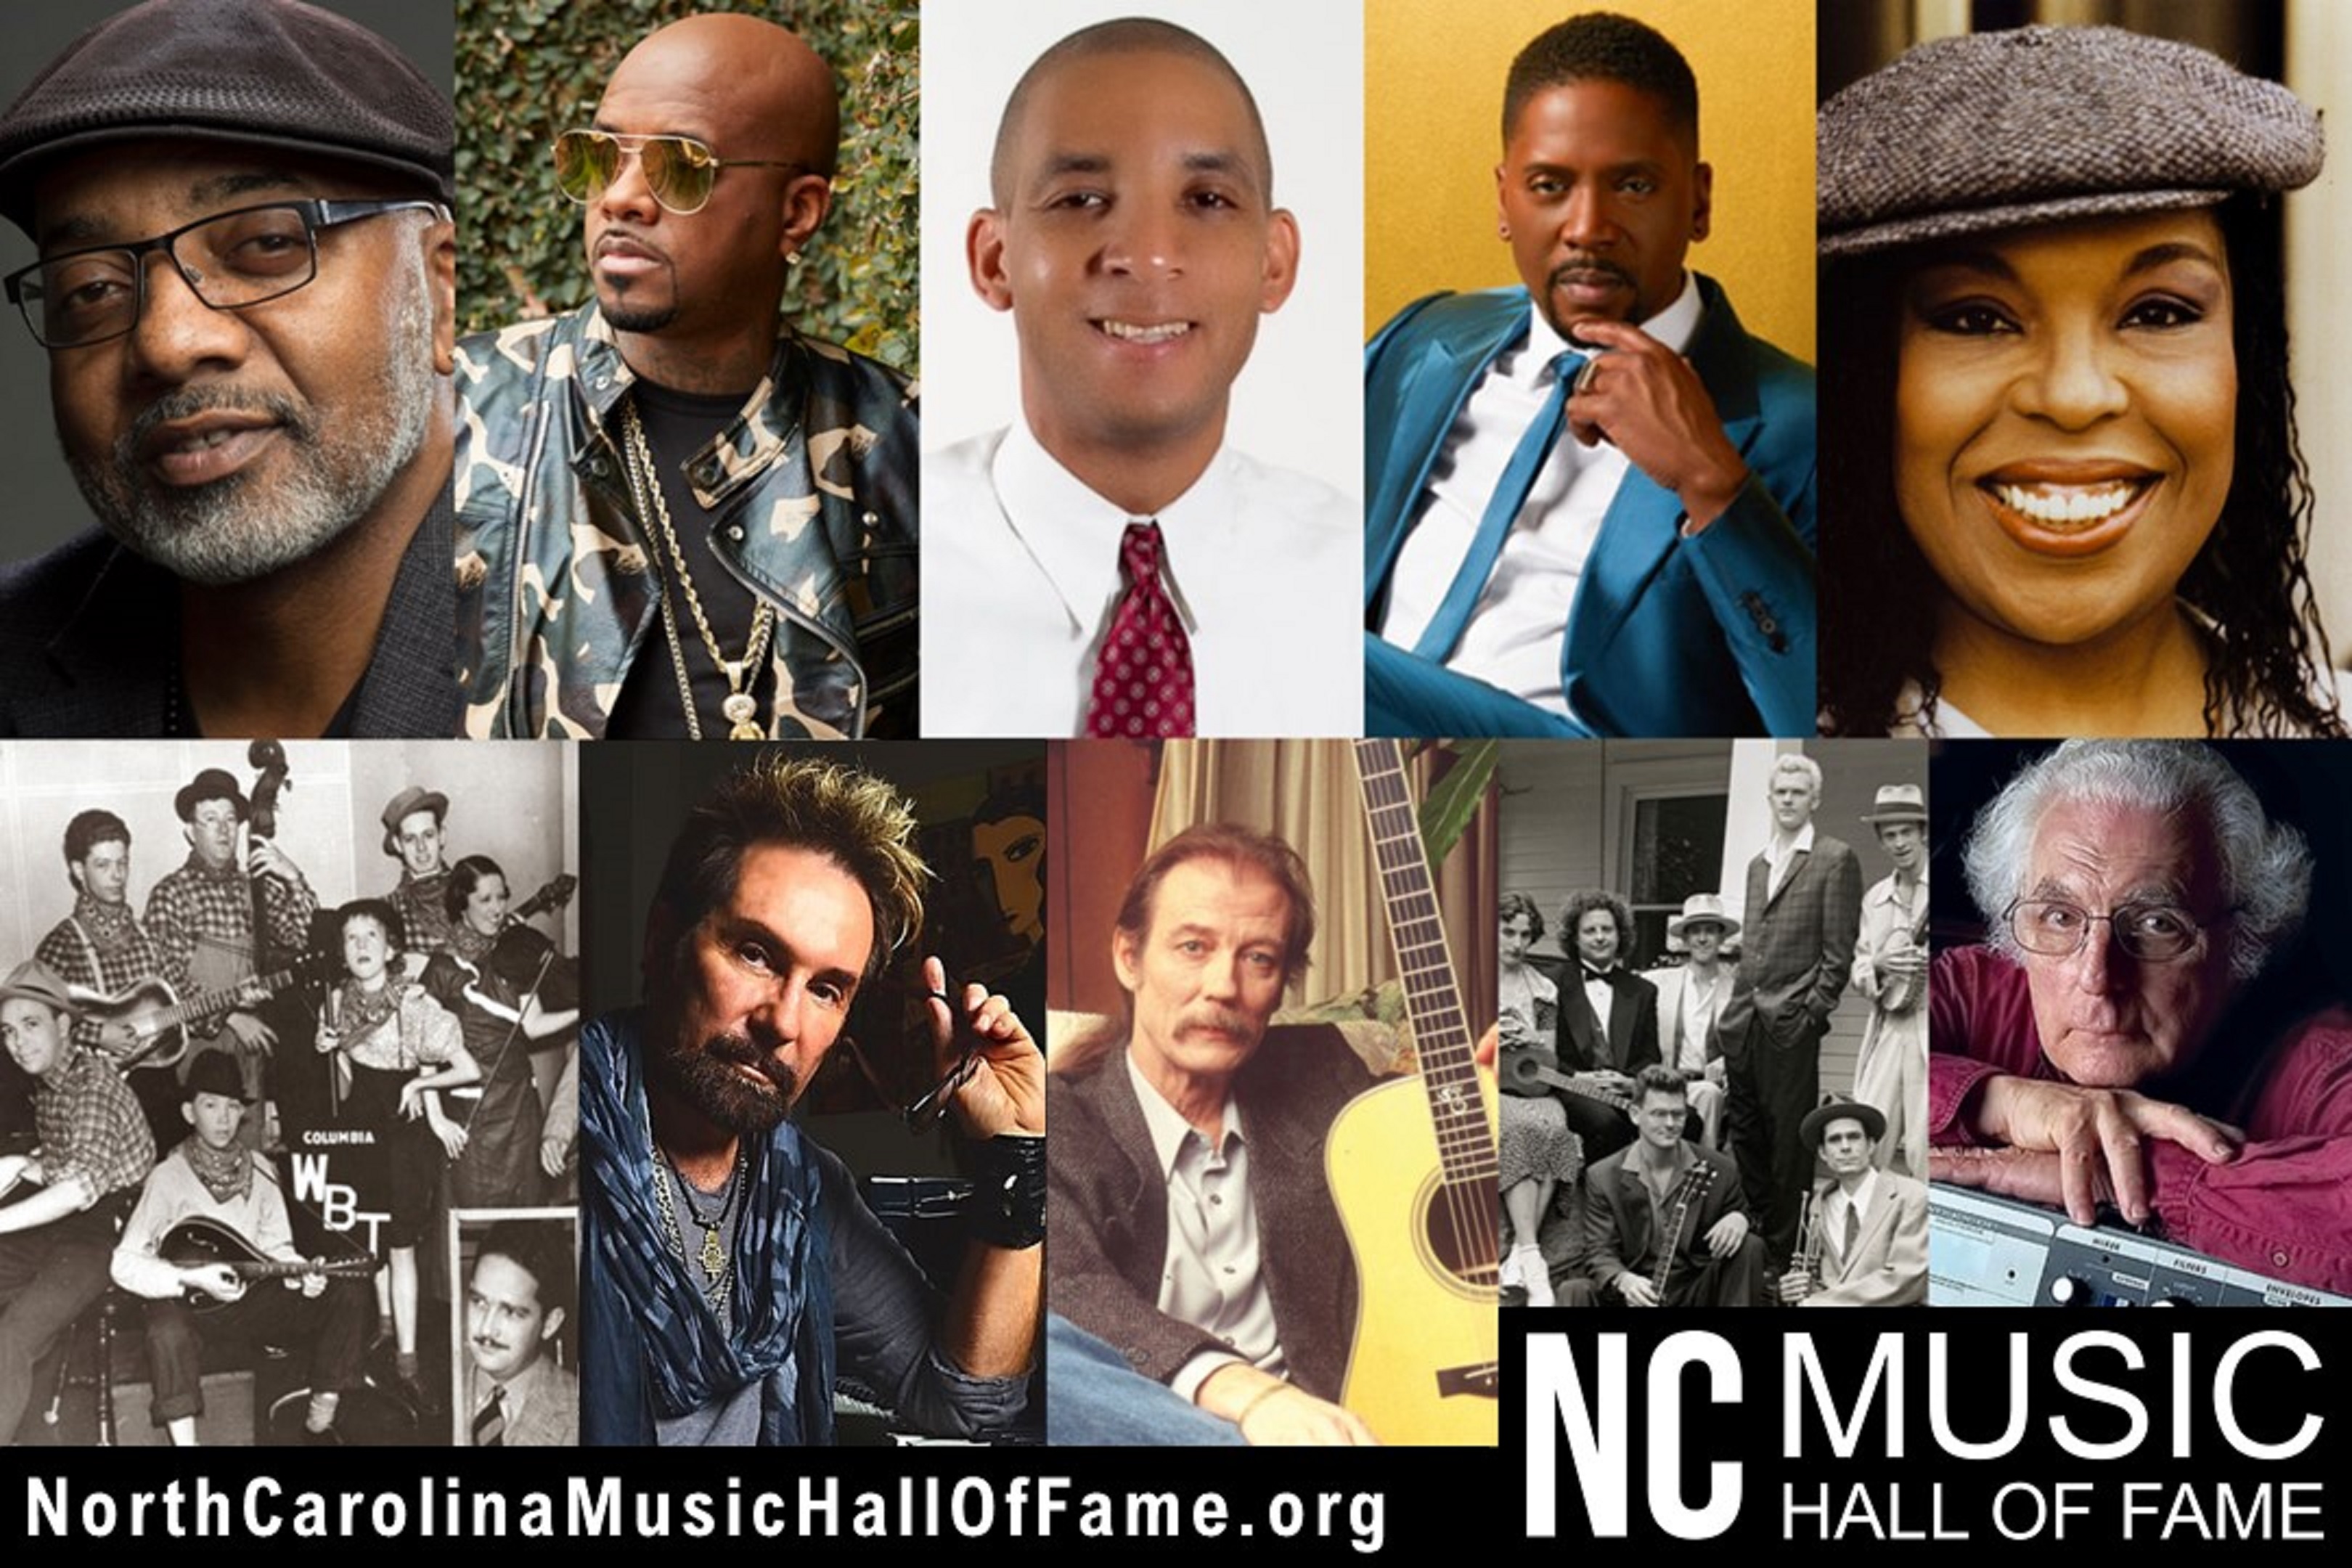 NC Music Hall of Fame Announces 2021 Inductees